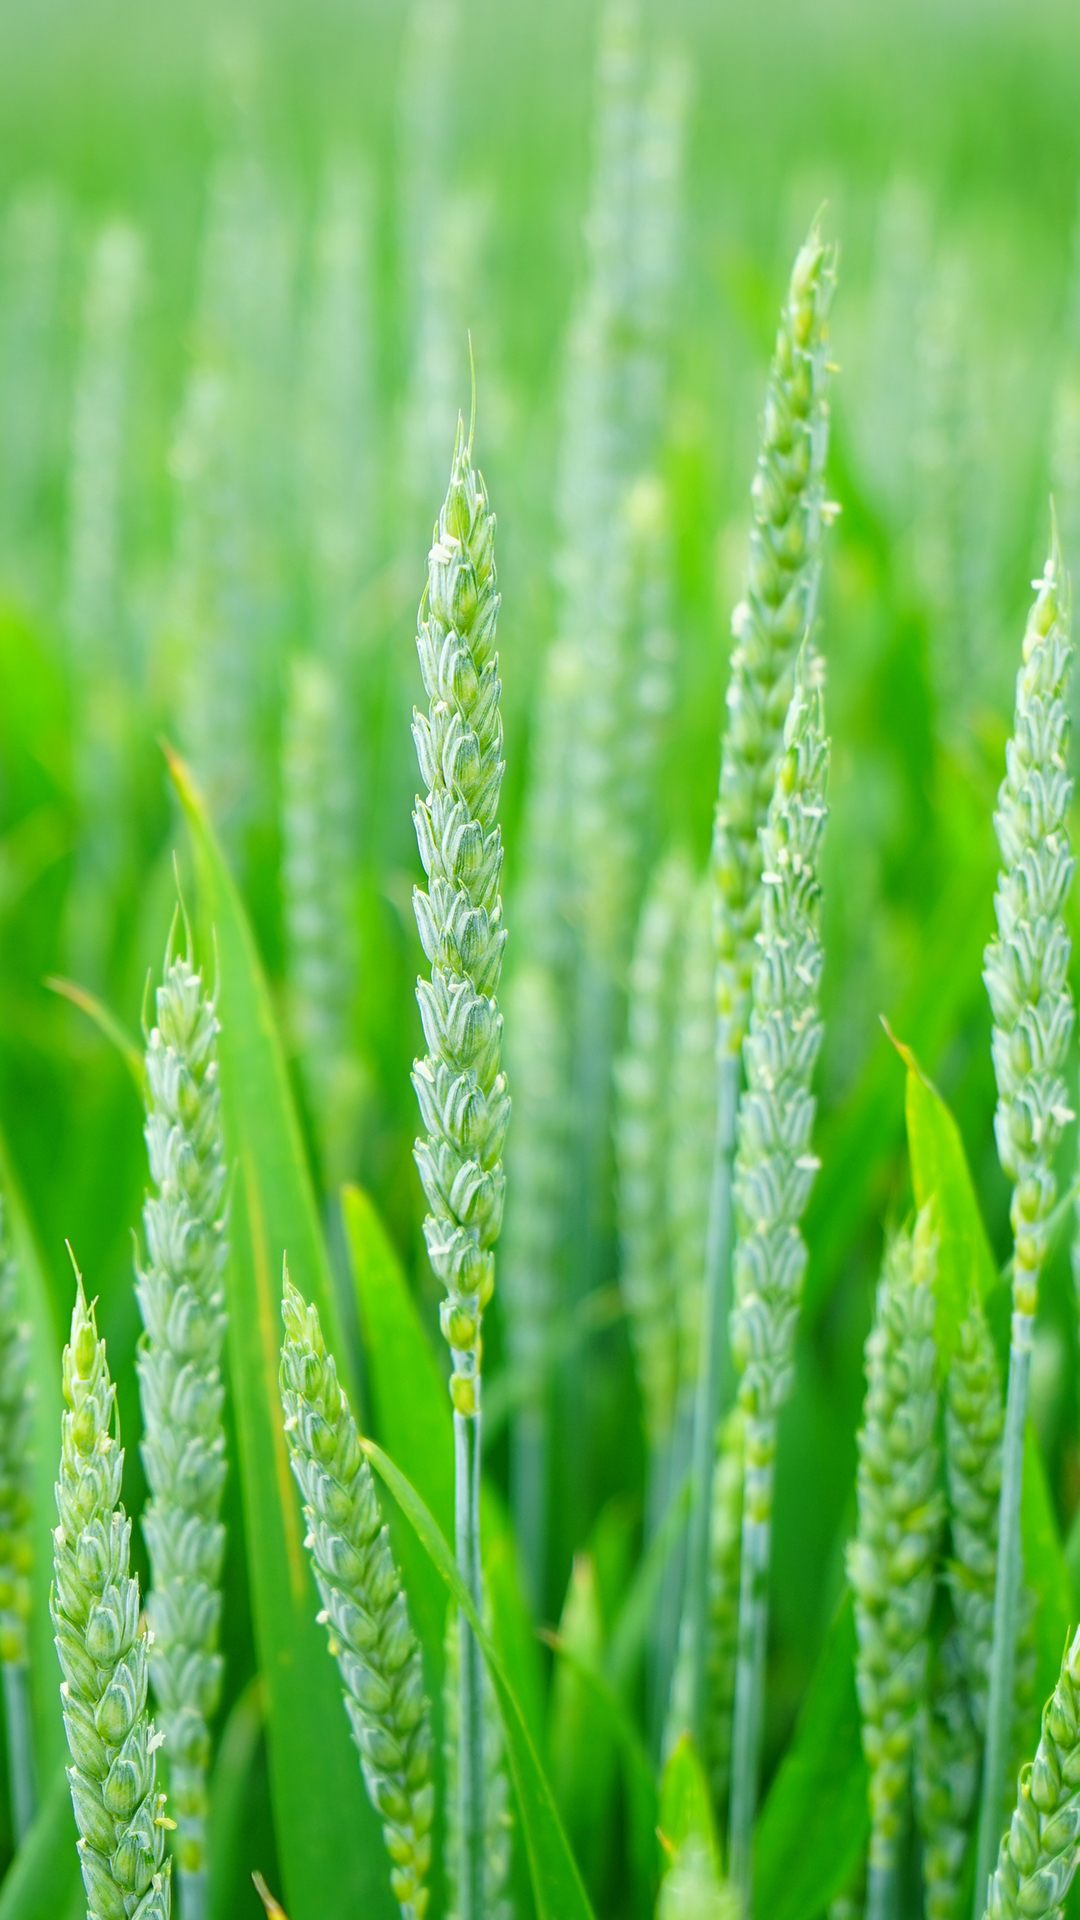 Green Wheat HD Wallpaper For Your Huawei Honor 8 Smartphone